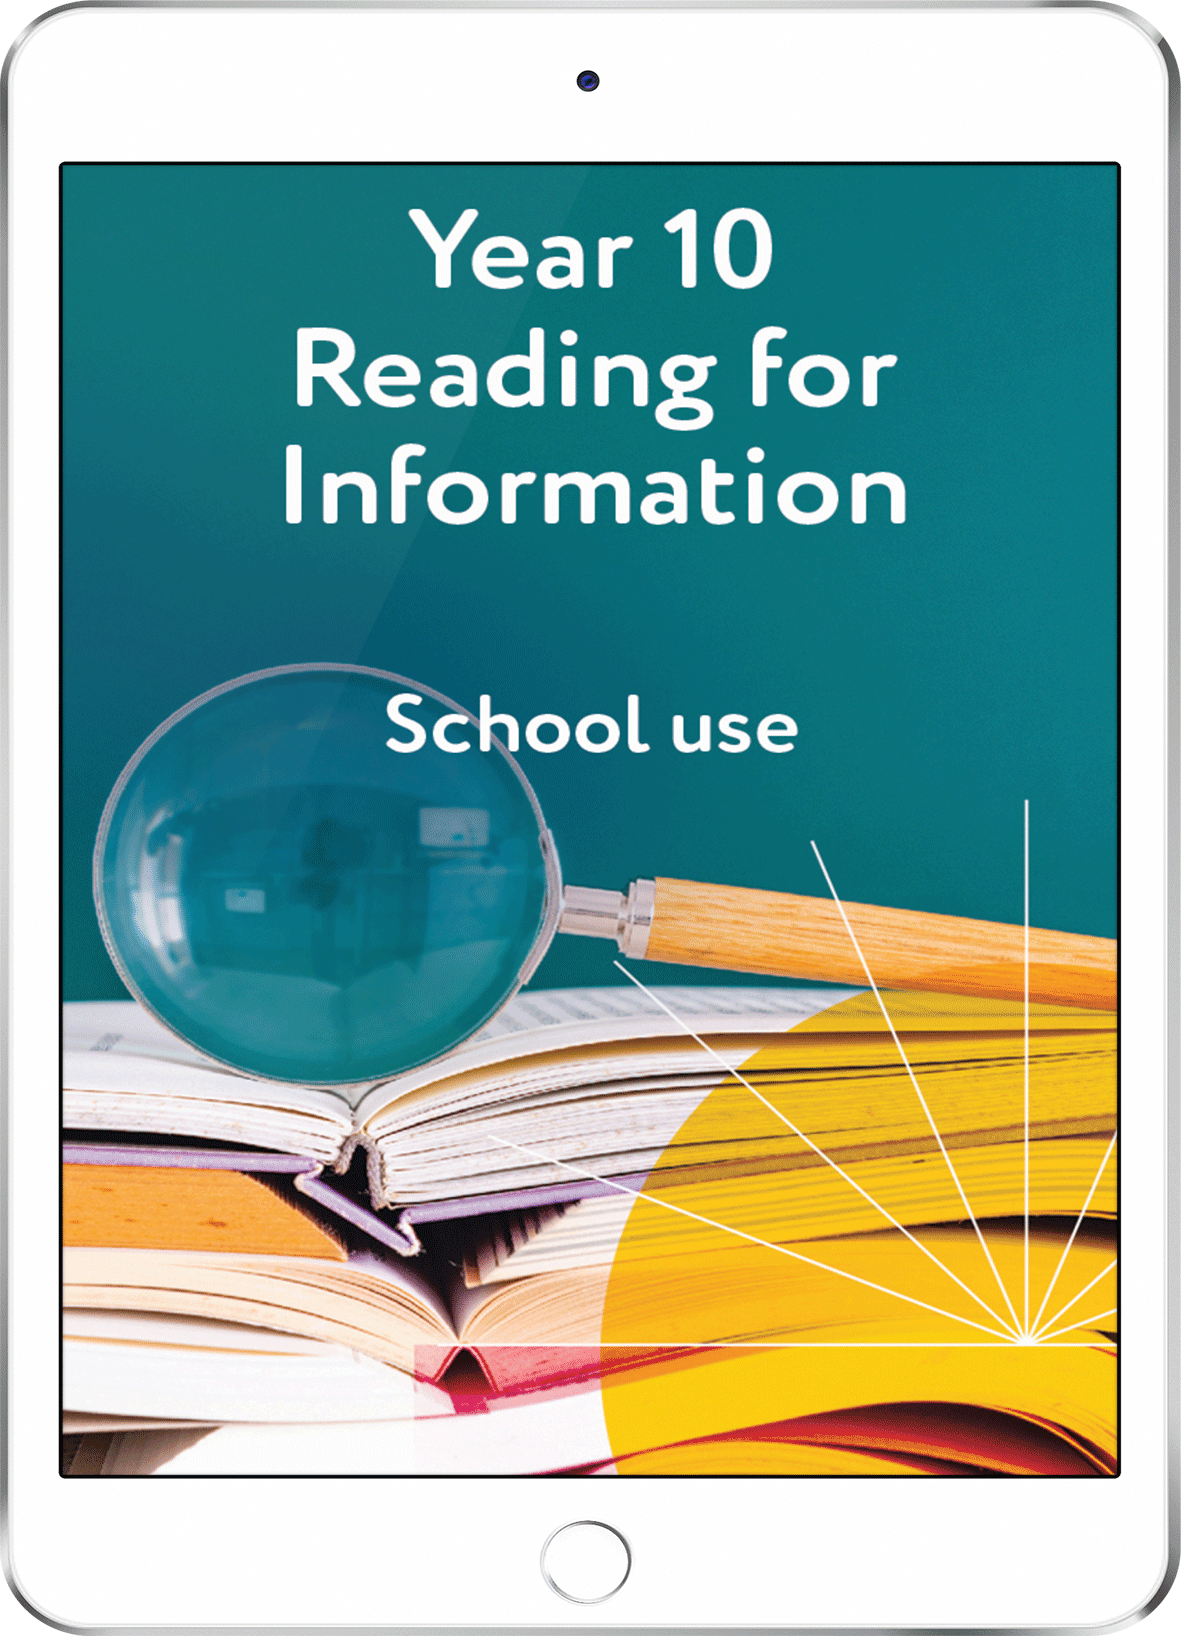 Year 10 Reading for Information - School Use